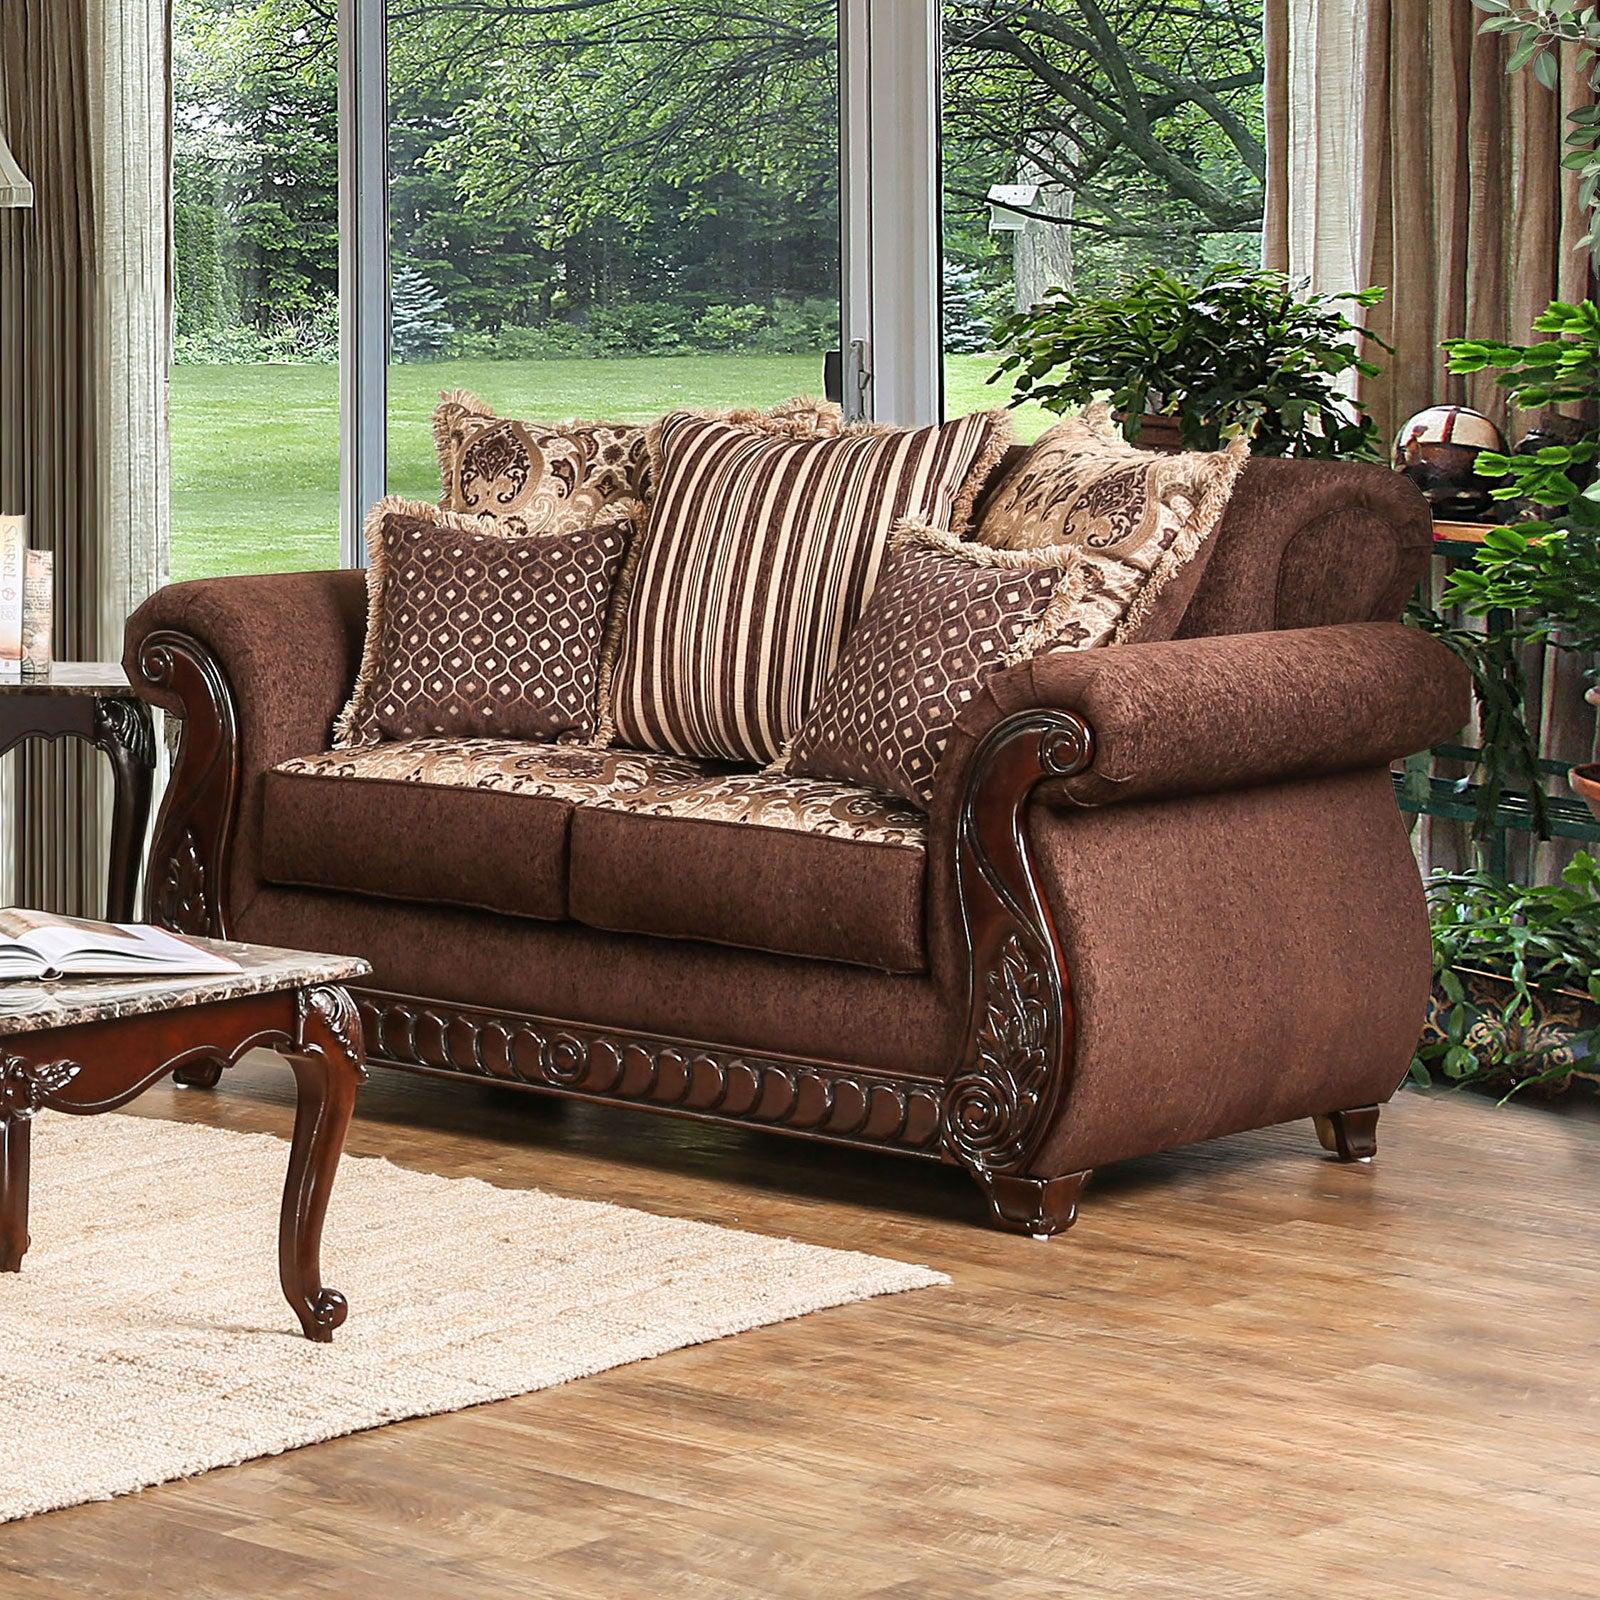 Traditional Loveseat TABITHA SM6109-LV SM6109-LV in Brown Fabric